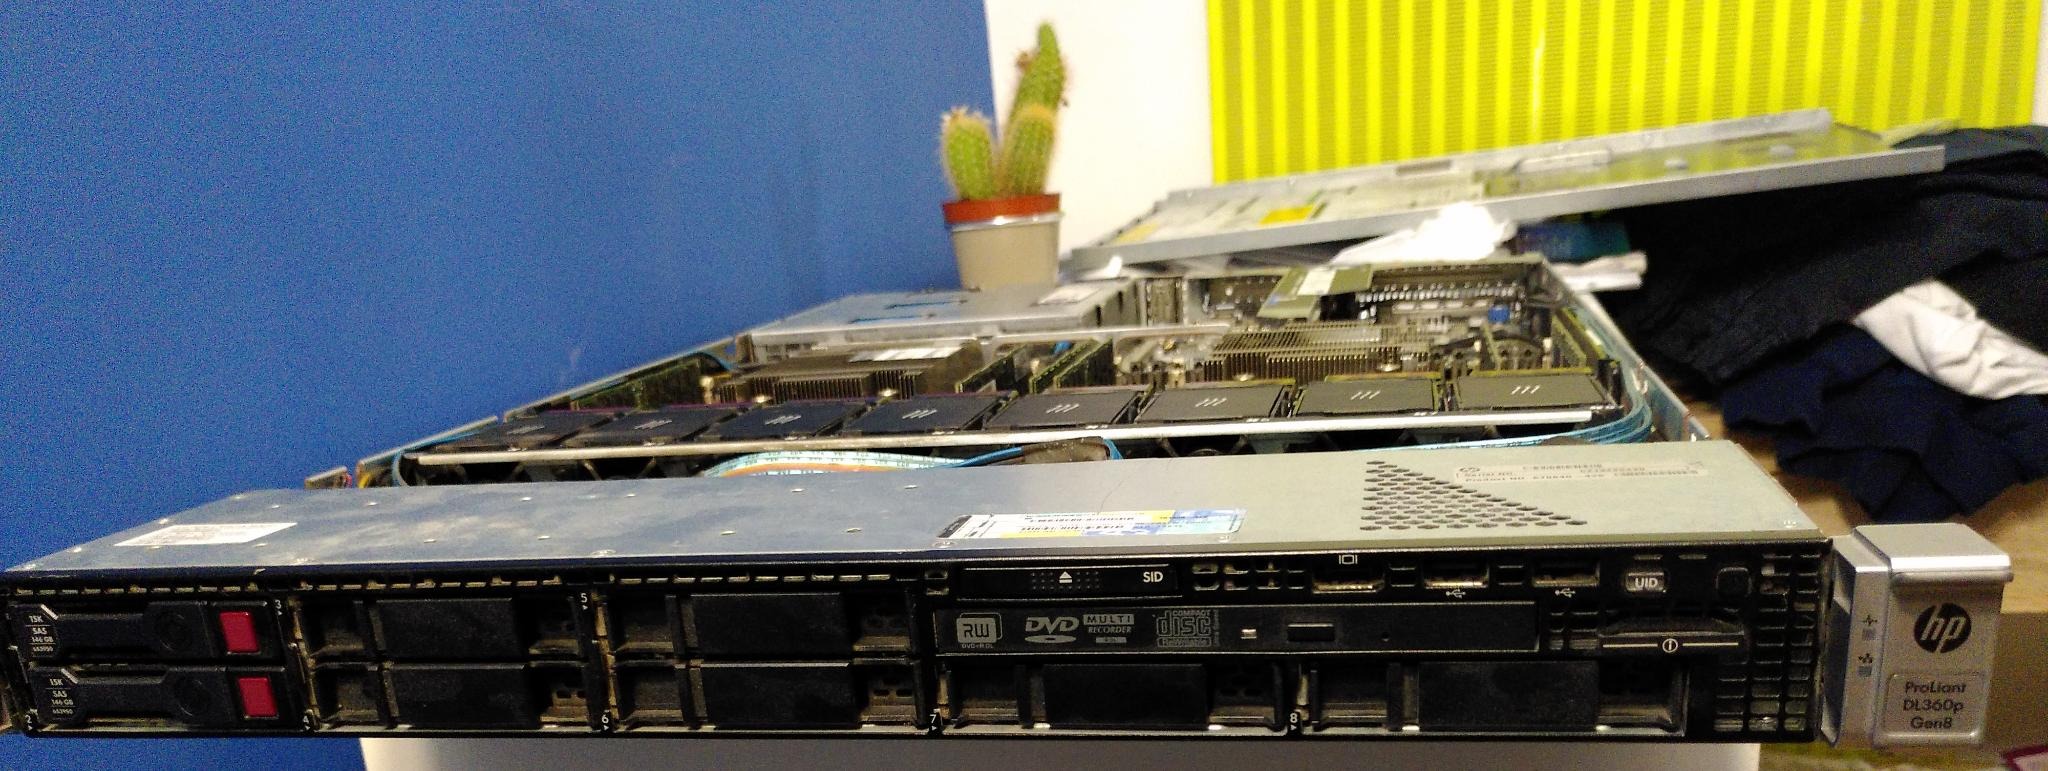 front view of HP 1U server